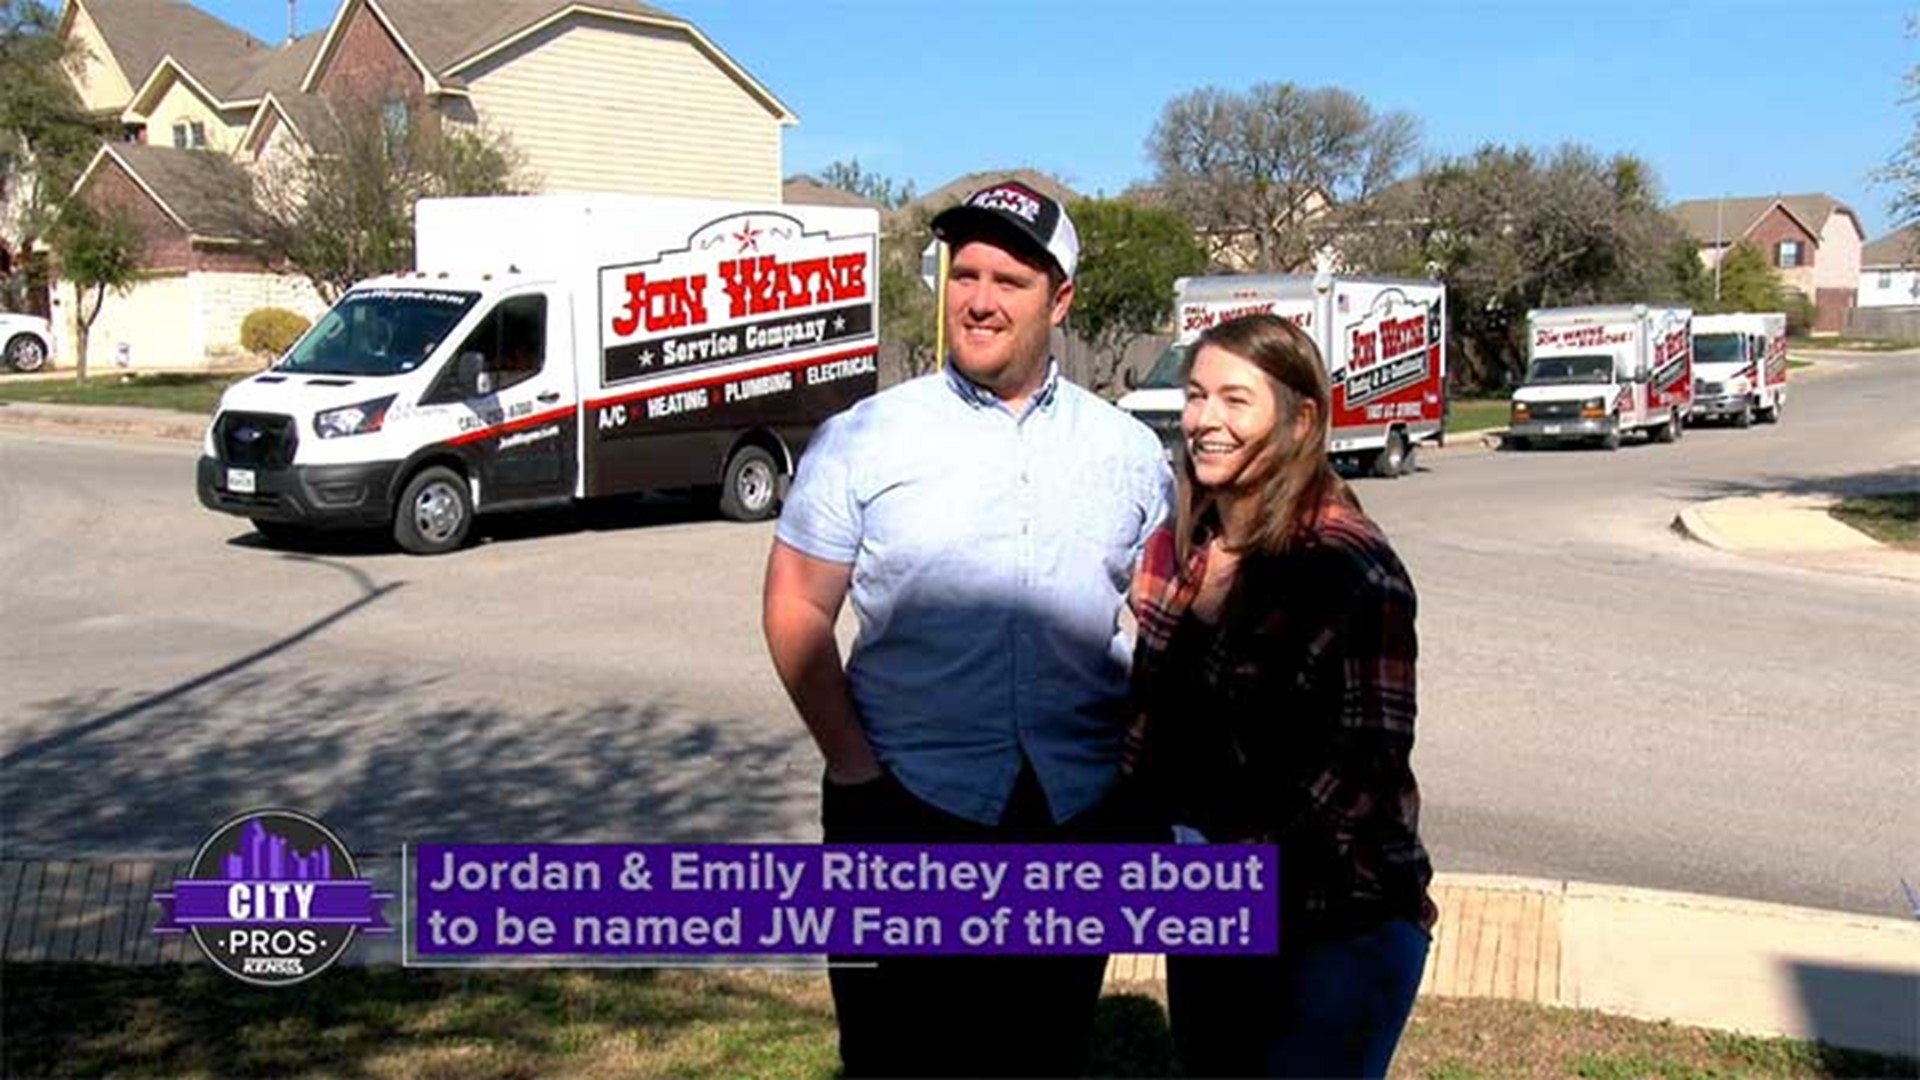 The couple won a $10,000 home makeover from Jon Wayne!